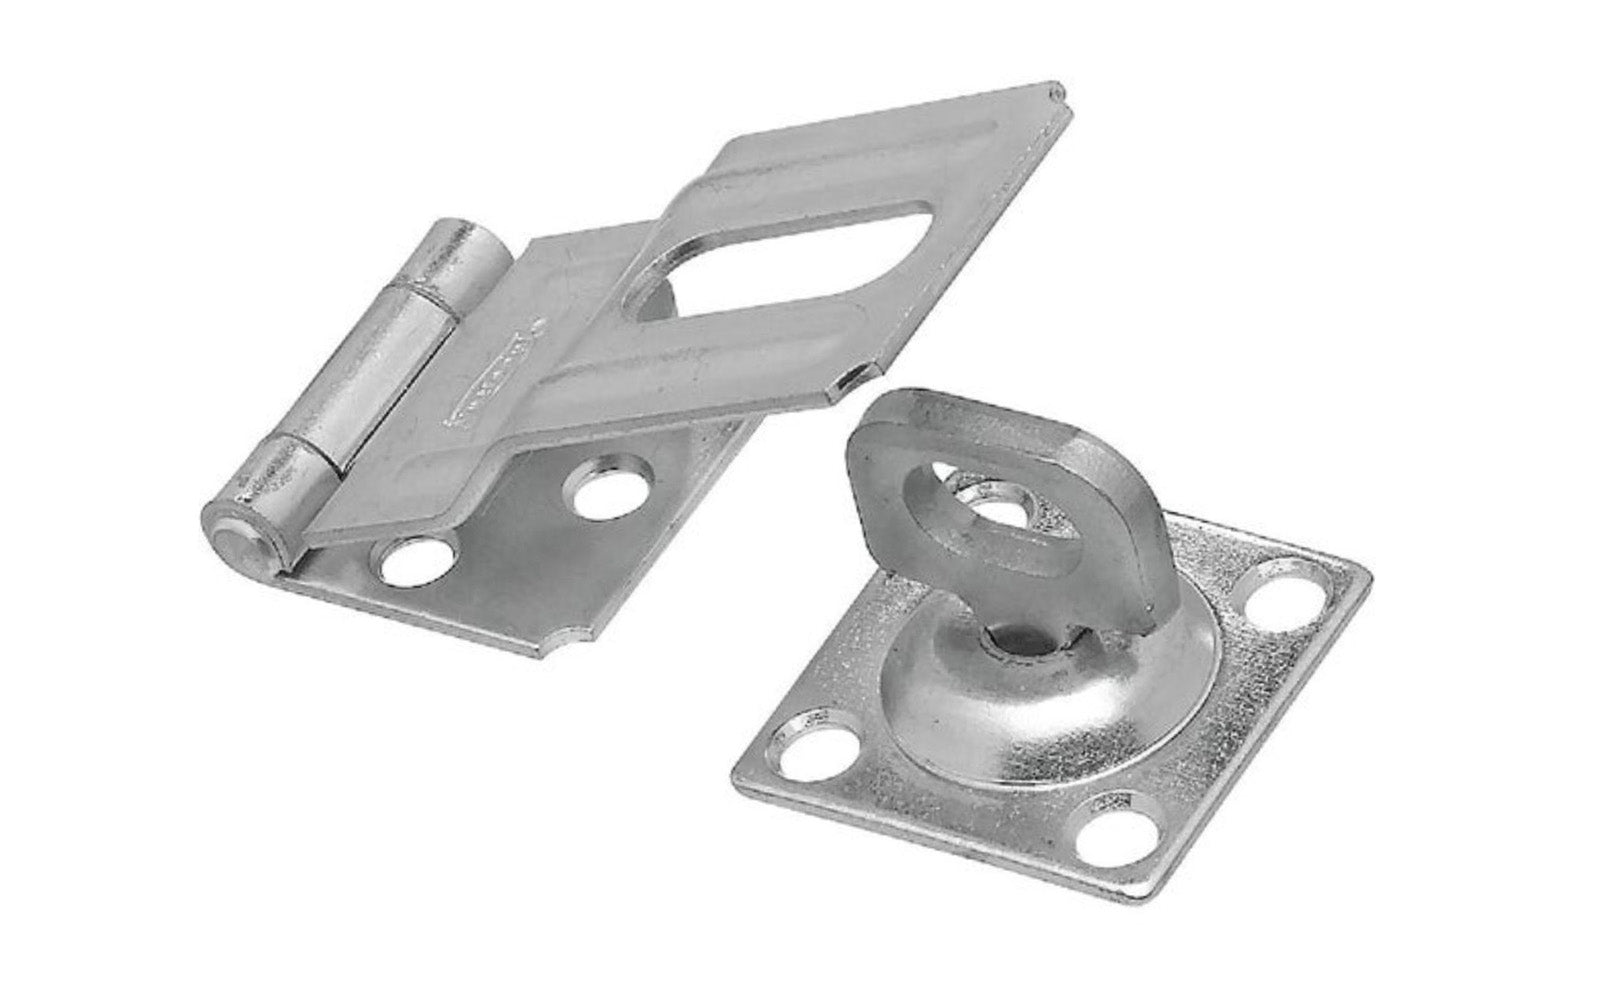 3-1/4" zinc-plated swivel safety hasp is designed to secure a wide variety of cabinets, small doors, boxes, trunks, & more. For security, all screws are concealed when hasp is closed. Includes swivel staple. National Hardware Model N102-855. 038613102859. Plated to withstand weather conditions & prevent corrosion.